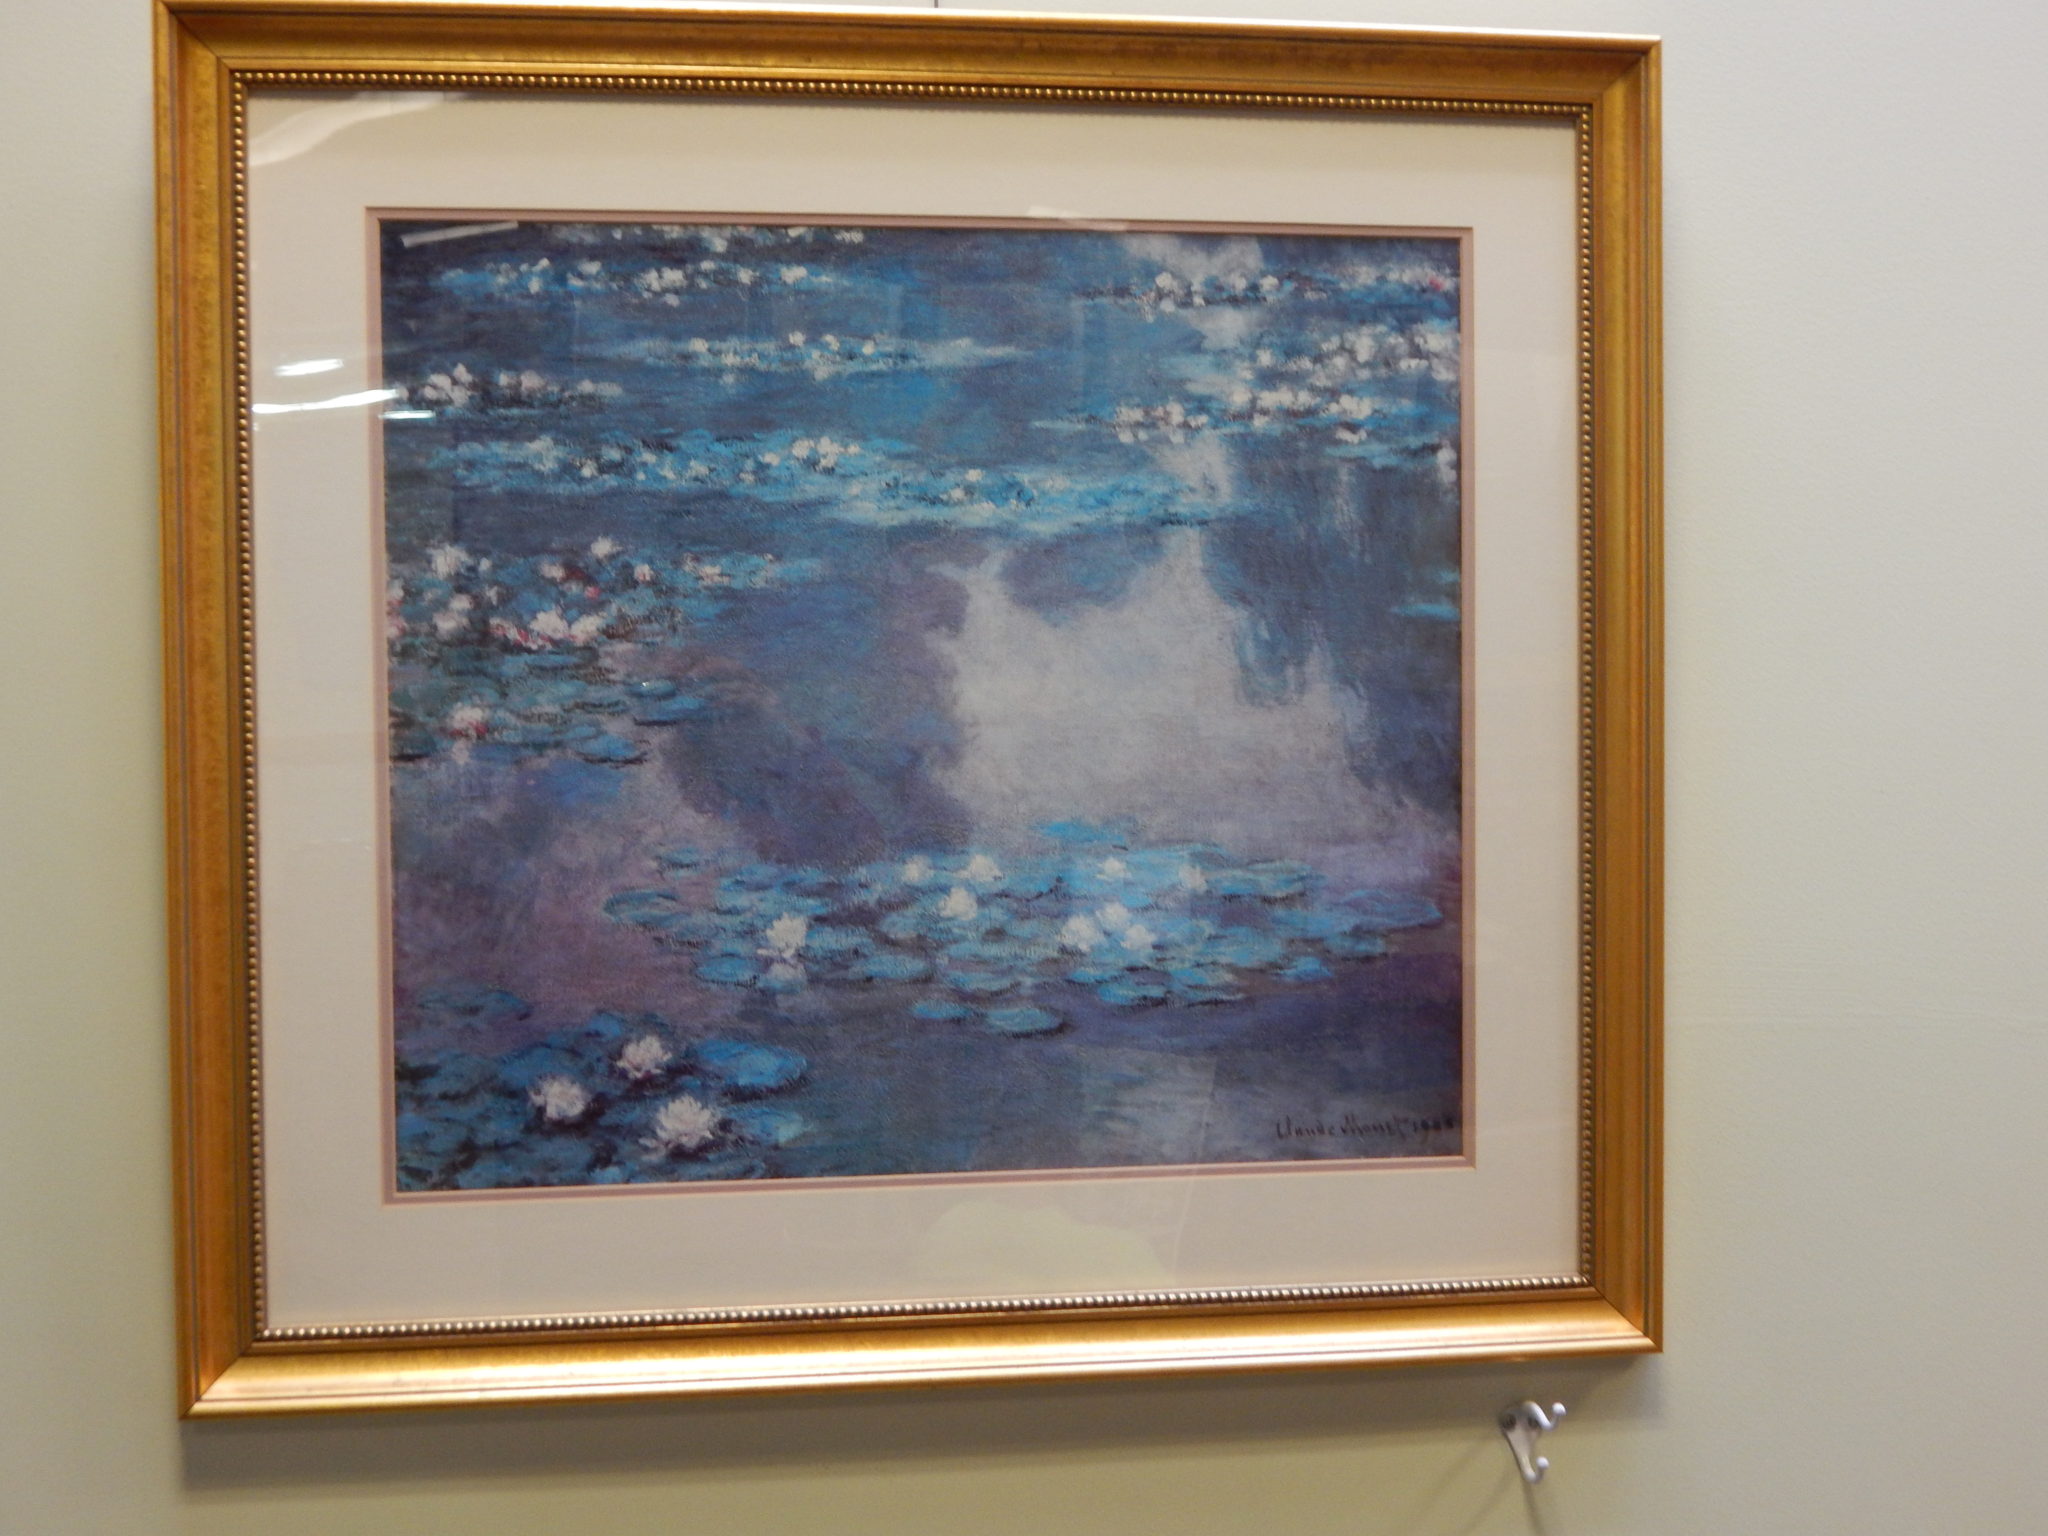 print of lily pads on water by Claude Monet